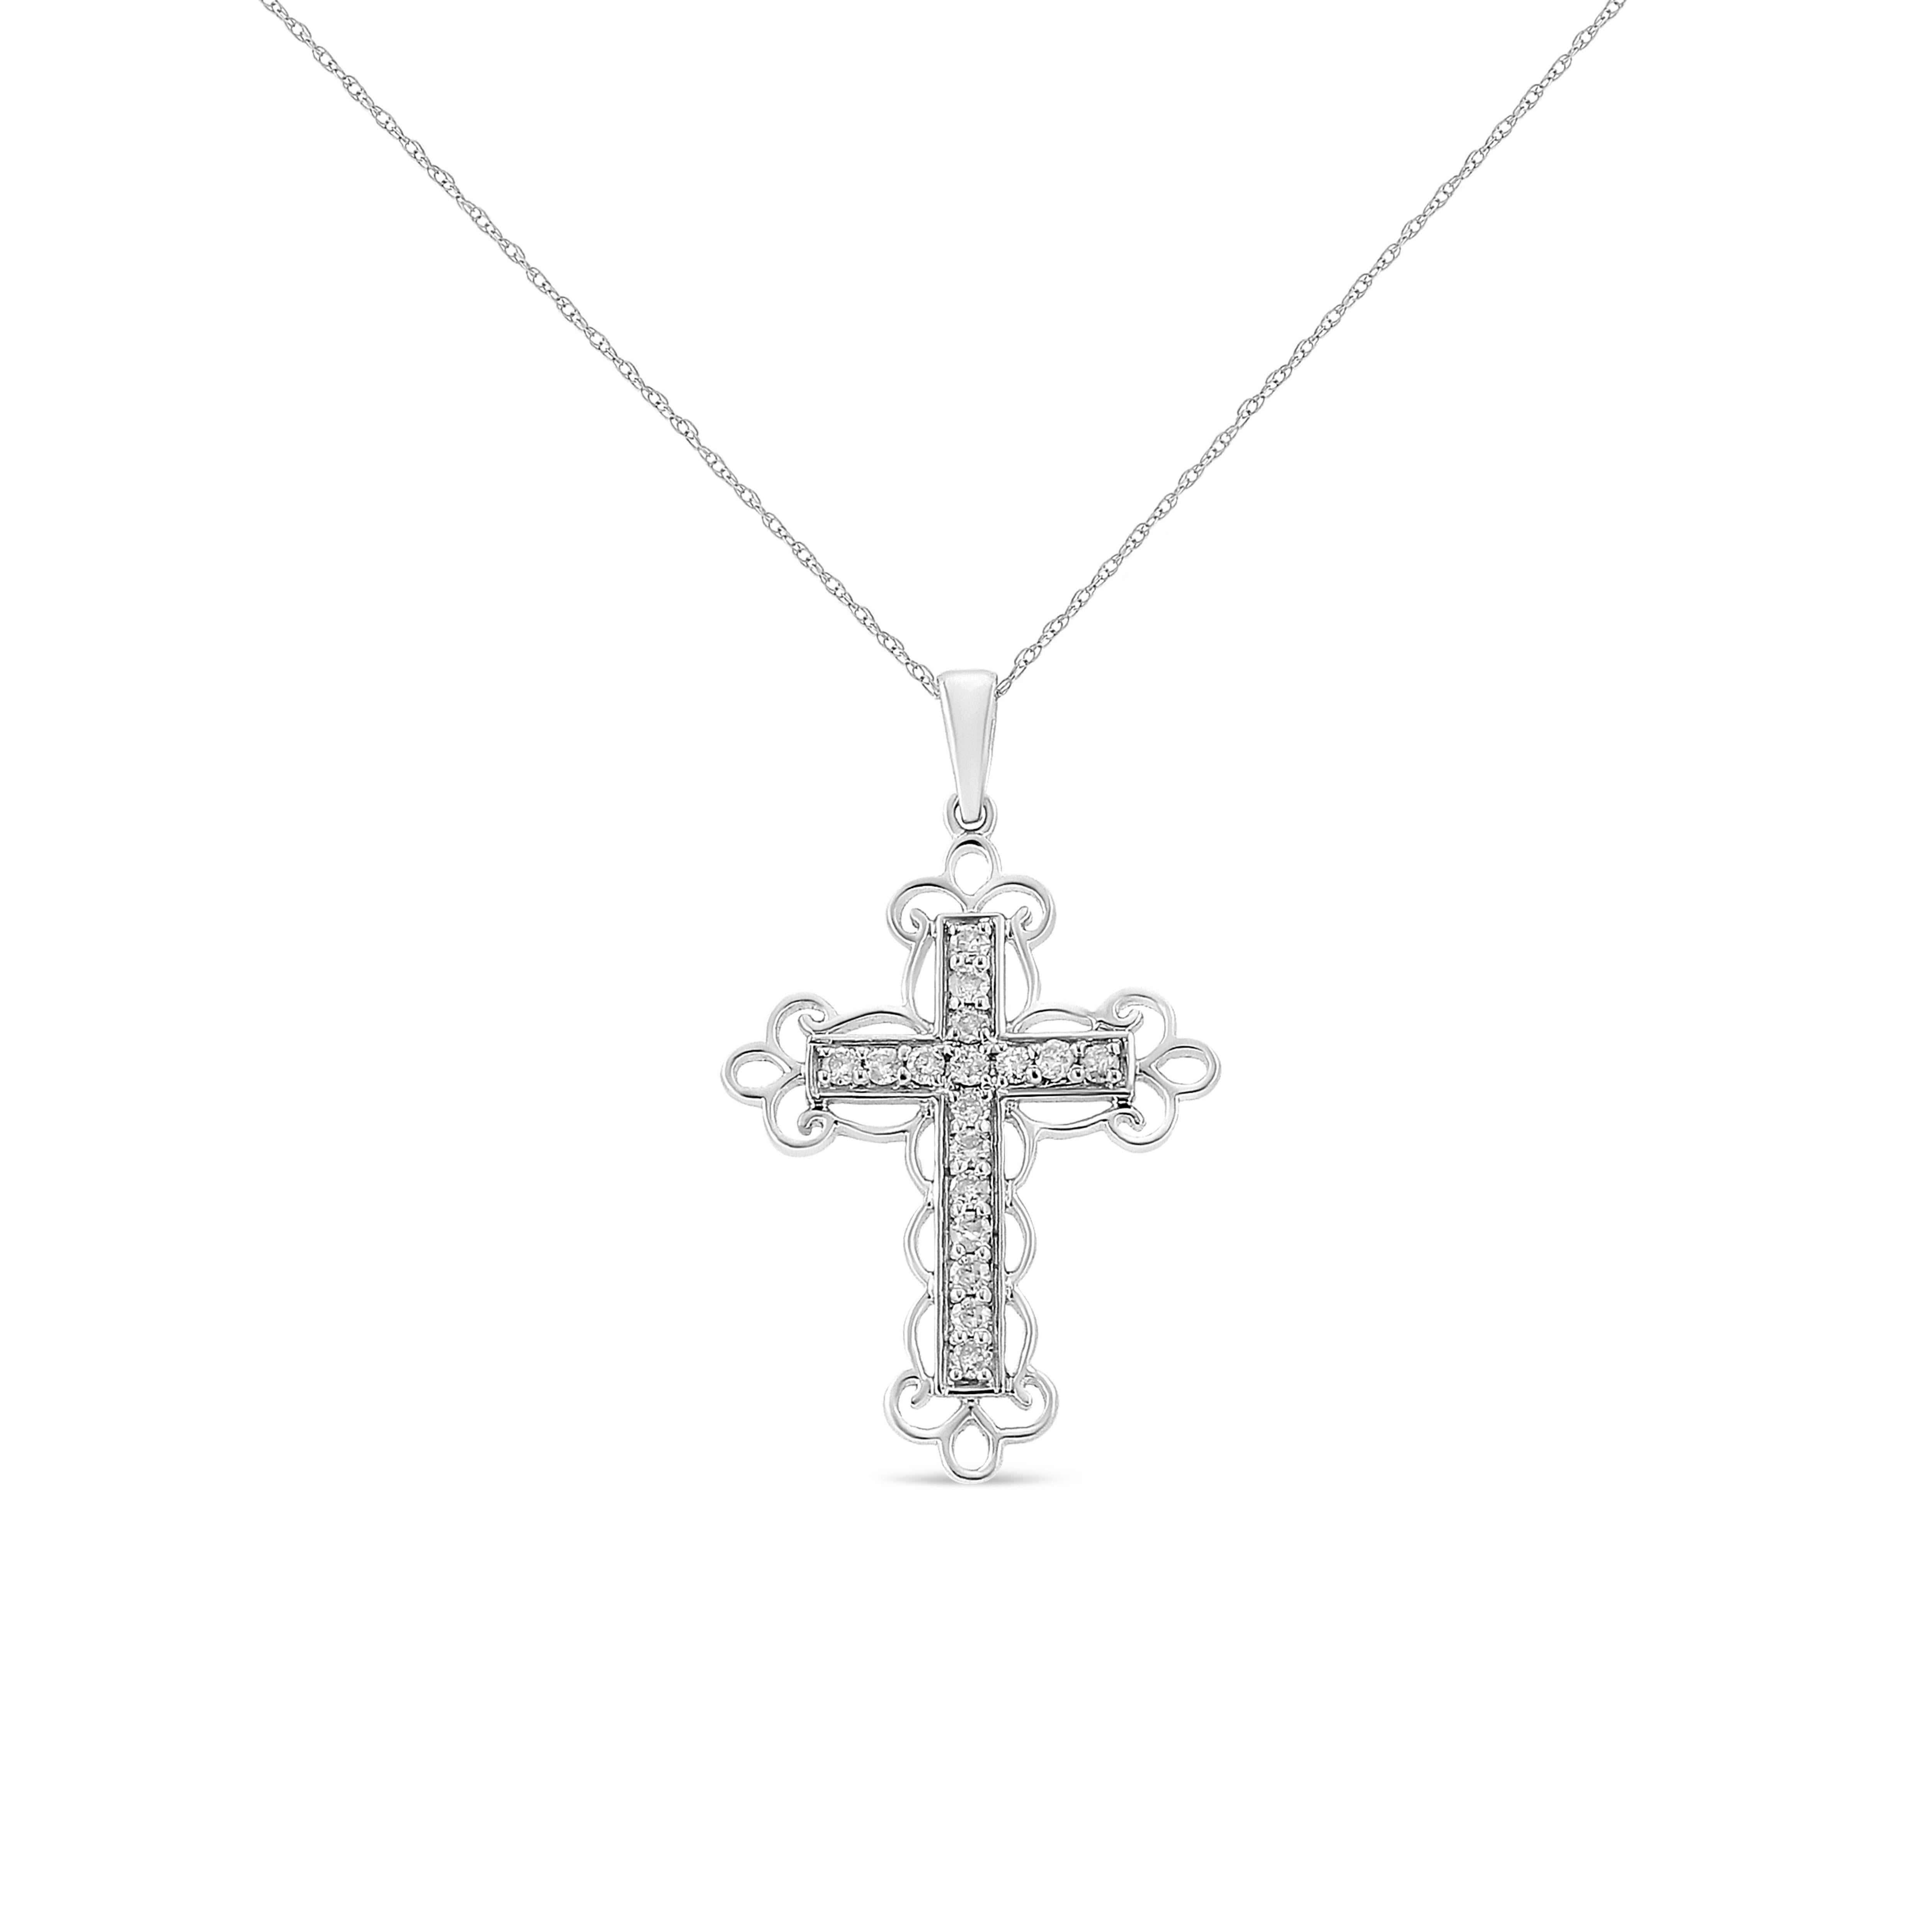 Celebrate your inner spirituality with this magnificent art-deco diamond cross pendant. This necklace is embellished with a 1/4 cttw of natural, round-cut diamonds. Silver spirals all around the cross to create a fancy eye-catching design. The